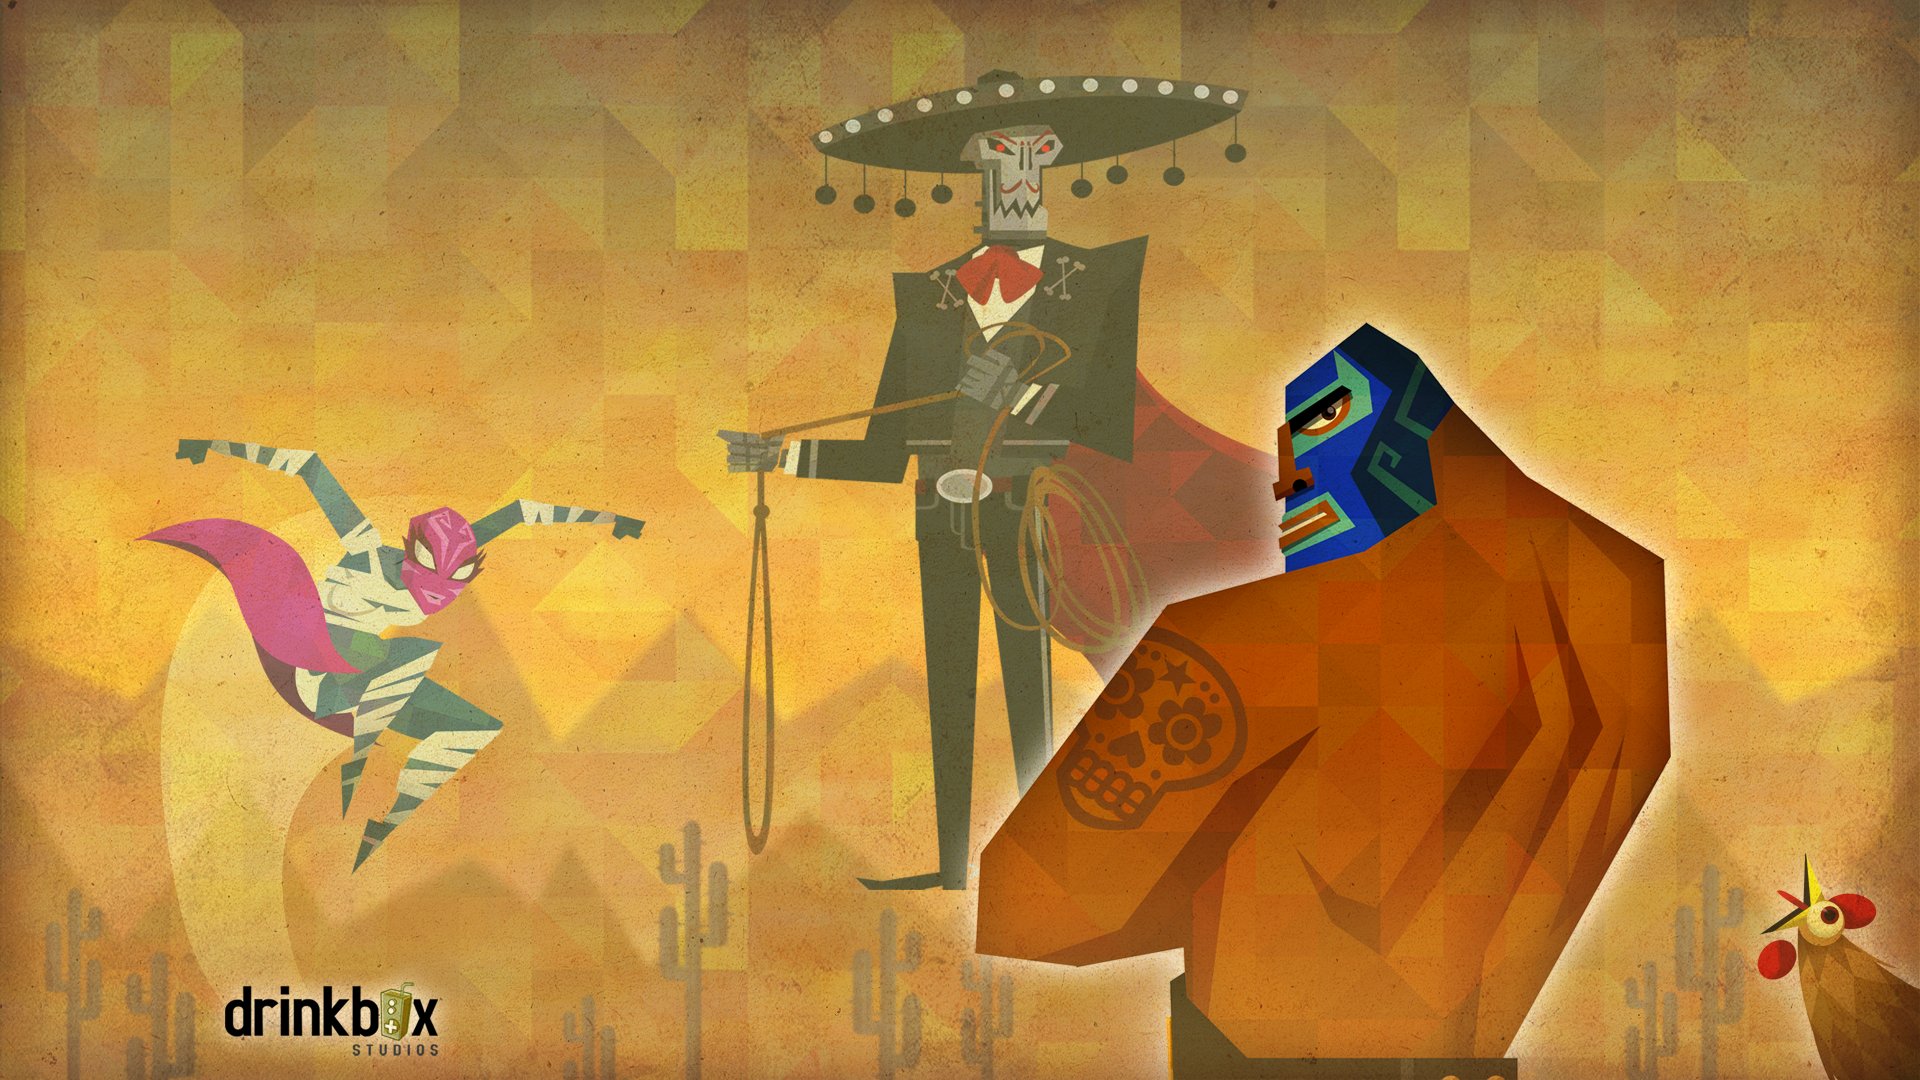 Guacamelee! Backgrounds, Compatible - PC, Mobile, Gadgets| 1920x1080 px